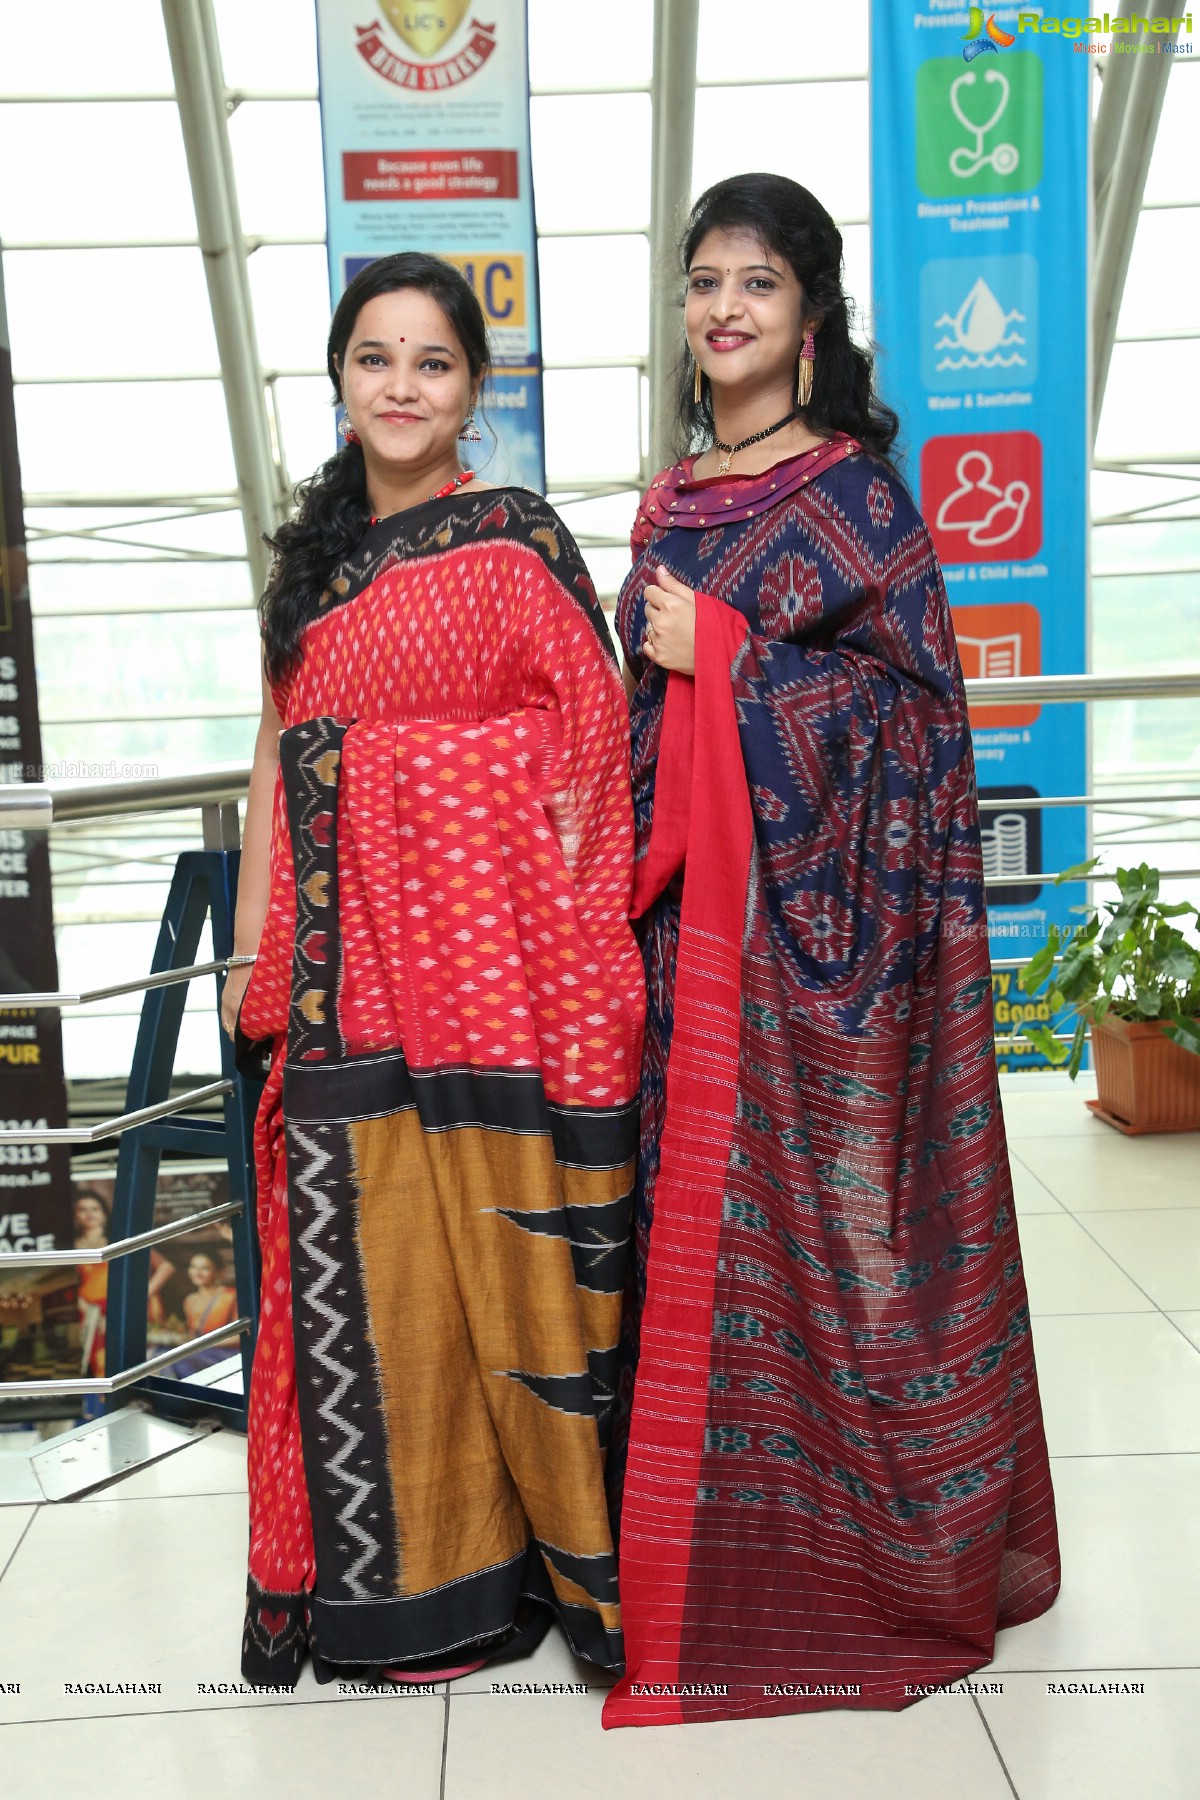 The Global 100 Sarees Pact group Handloom Showcase supporting Mallesham Movie